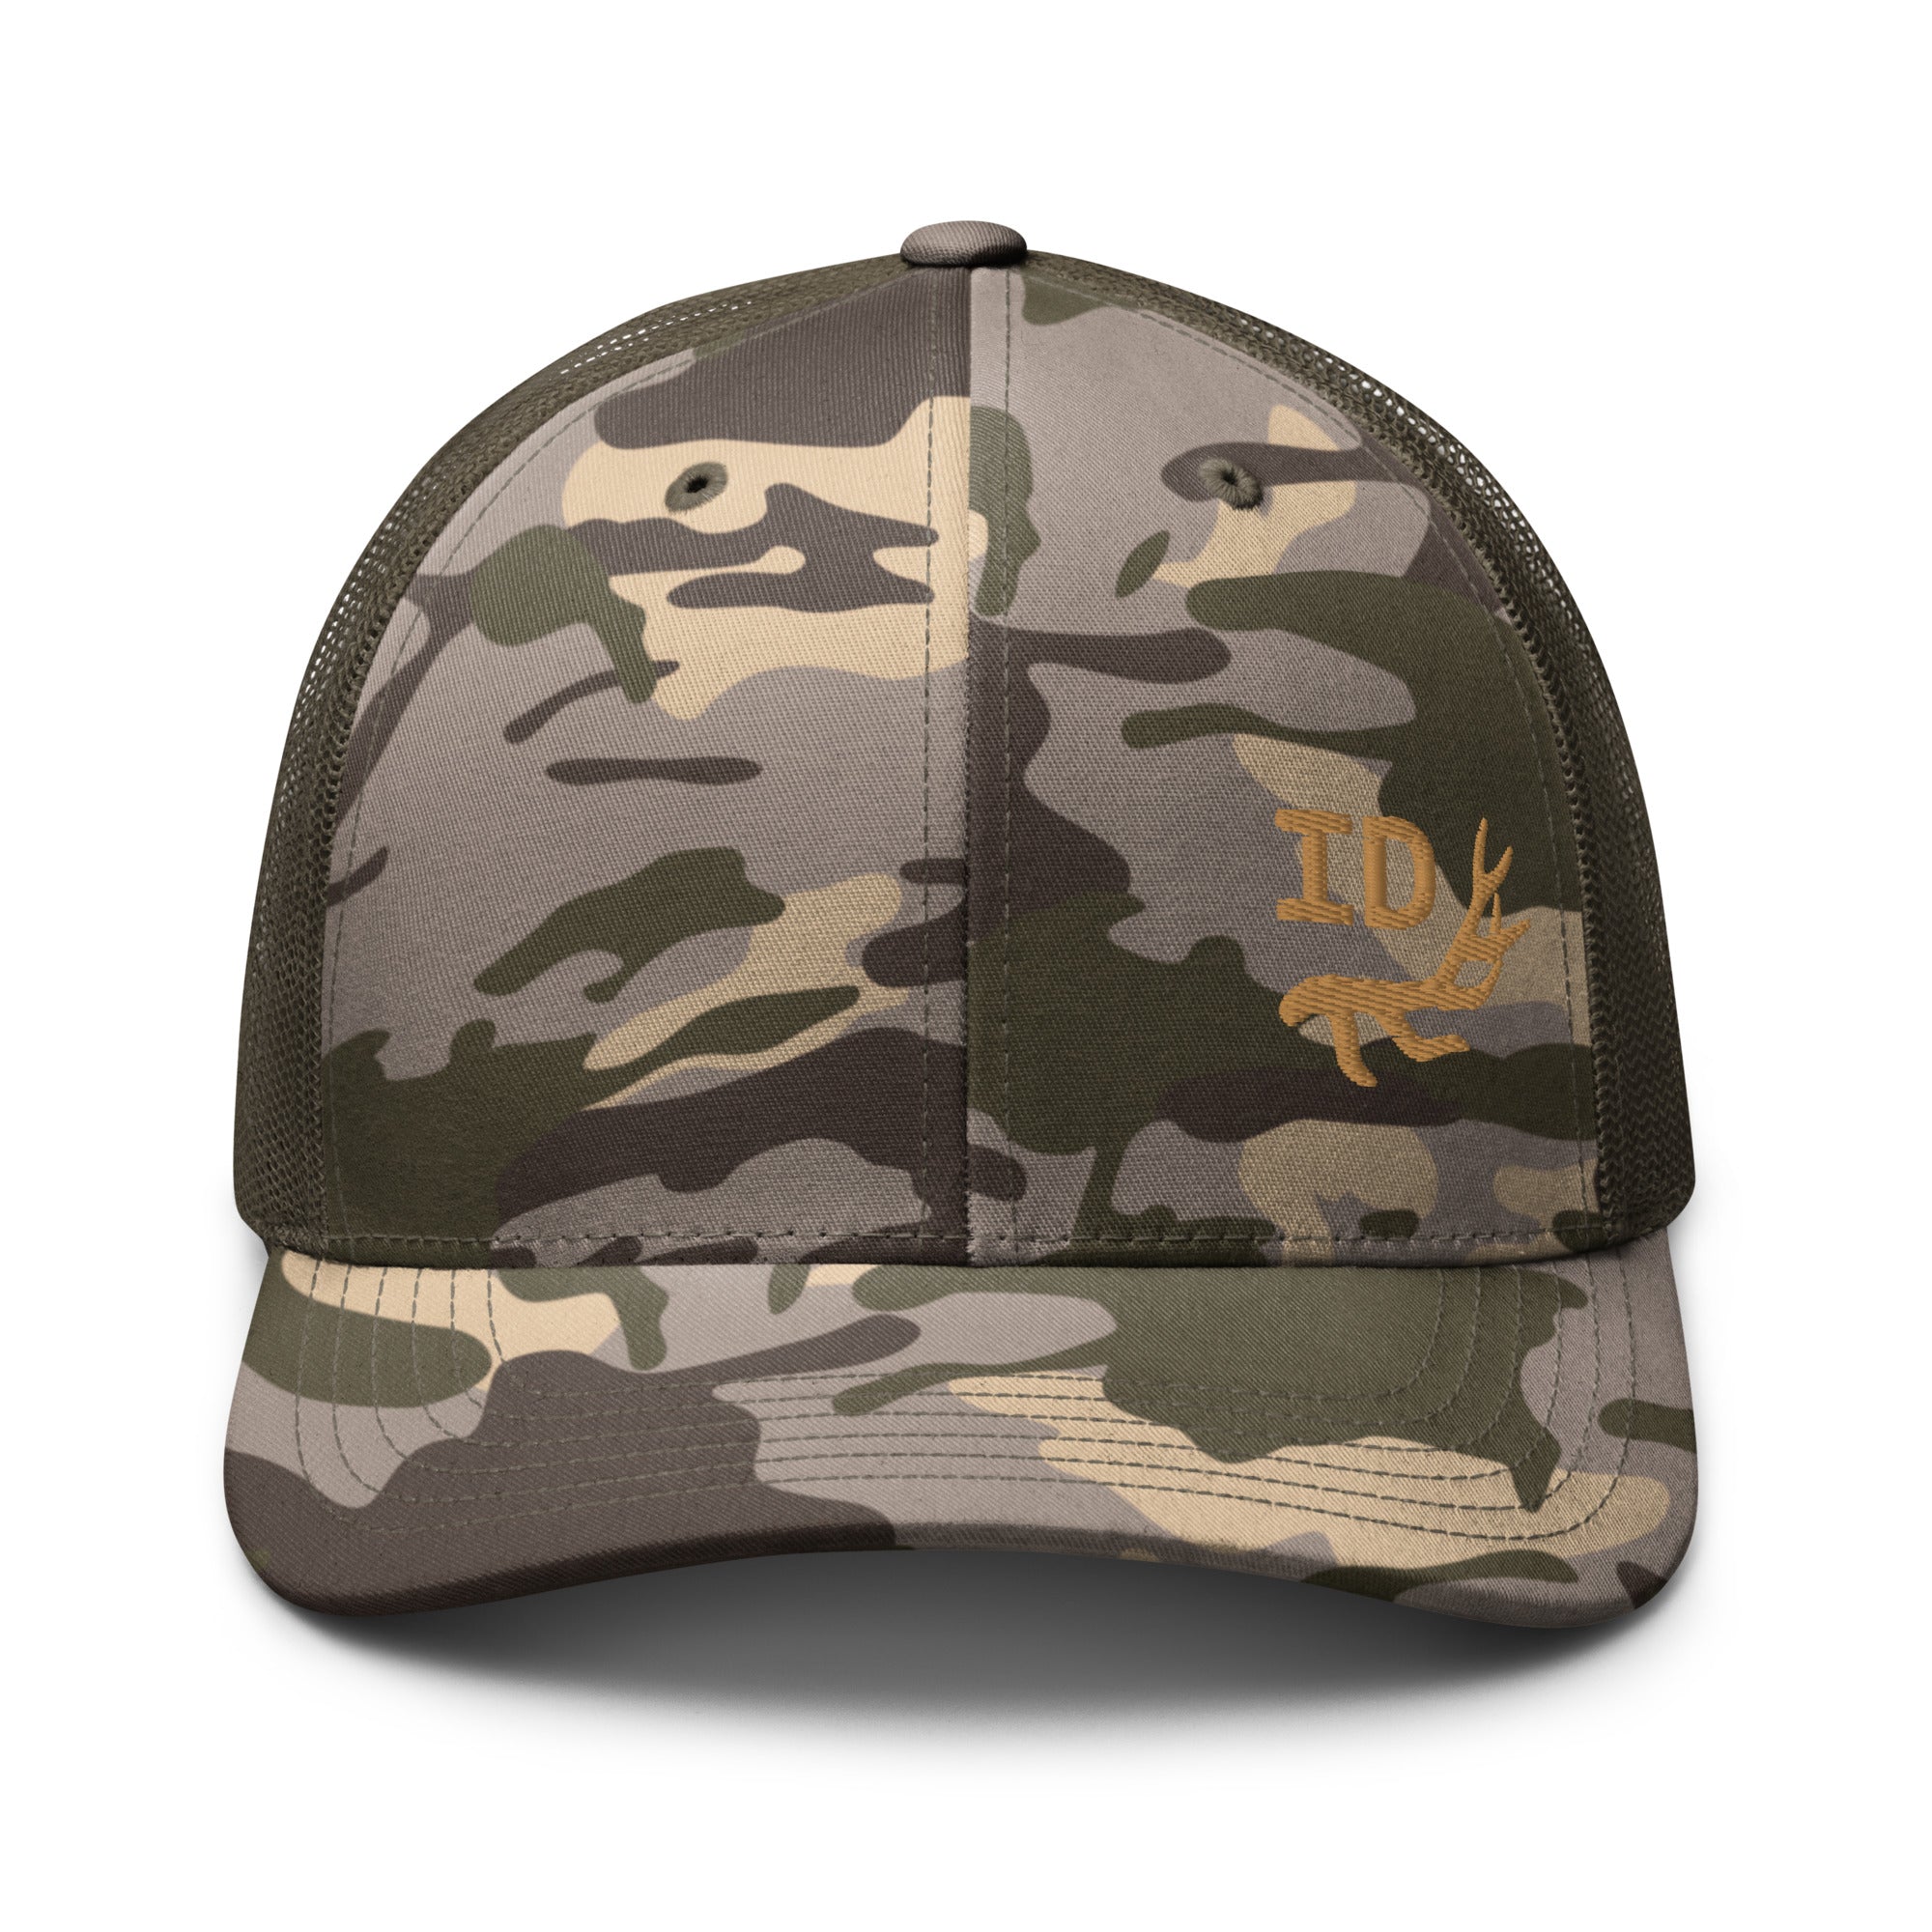 camouflage-trucker-hat-camo-olive-front-655e610995f7d.jpg